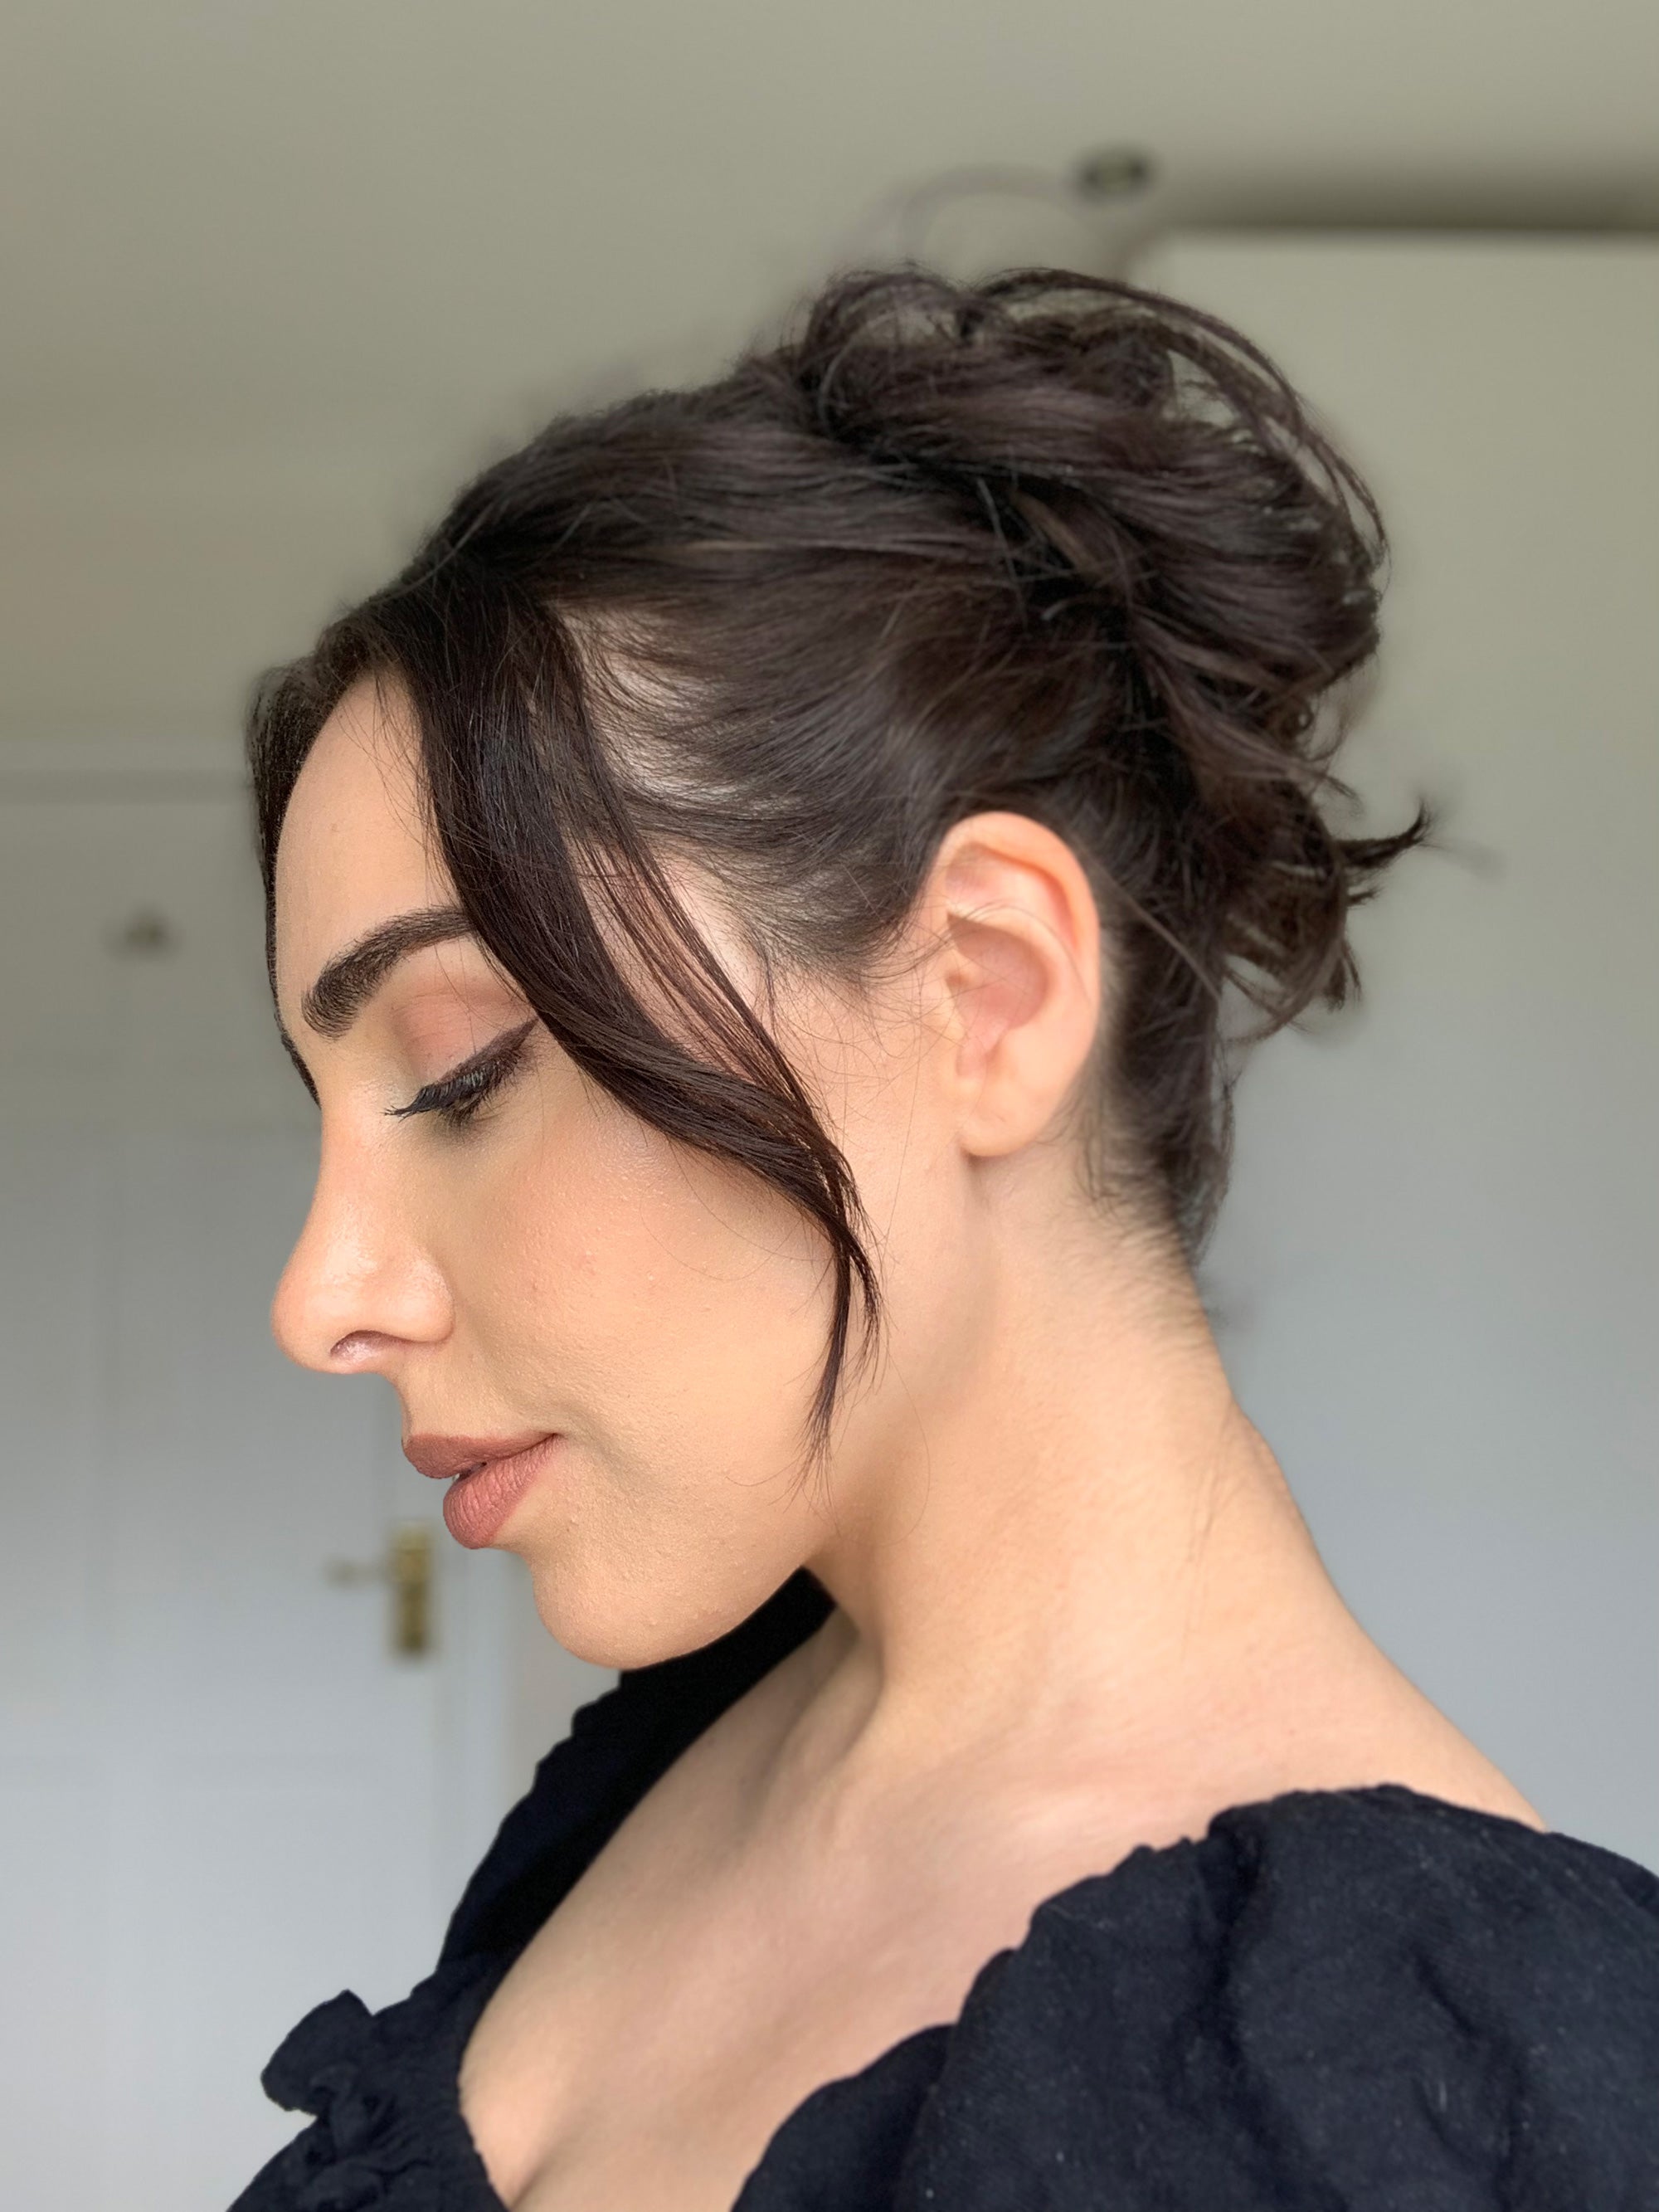 Image of Messy updo hairstyle for short hair guys